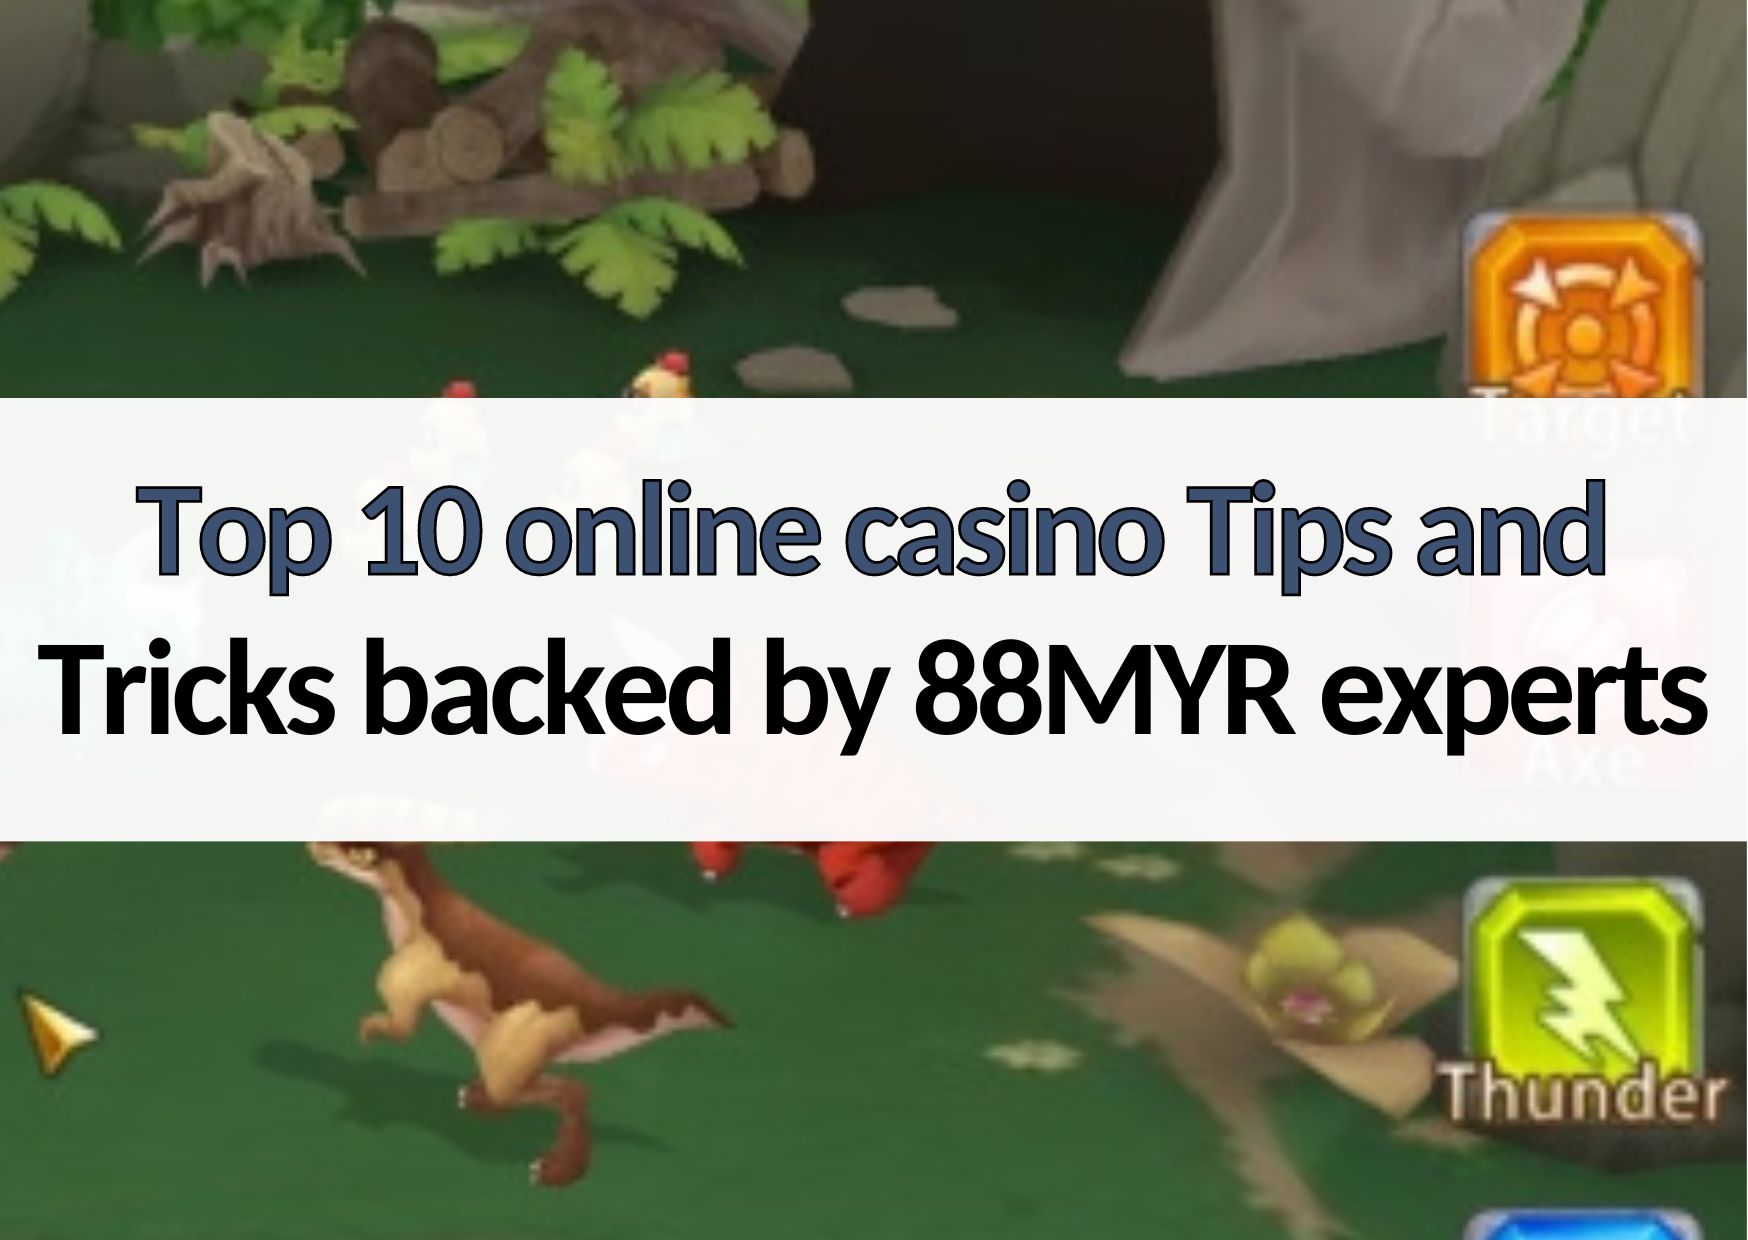 10 online casino tips and tricks backed by 88myr experts